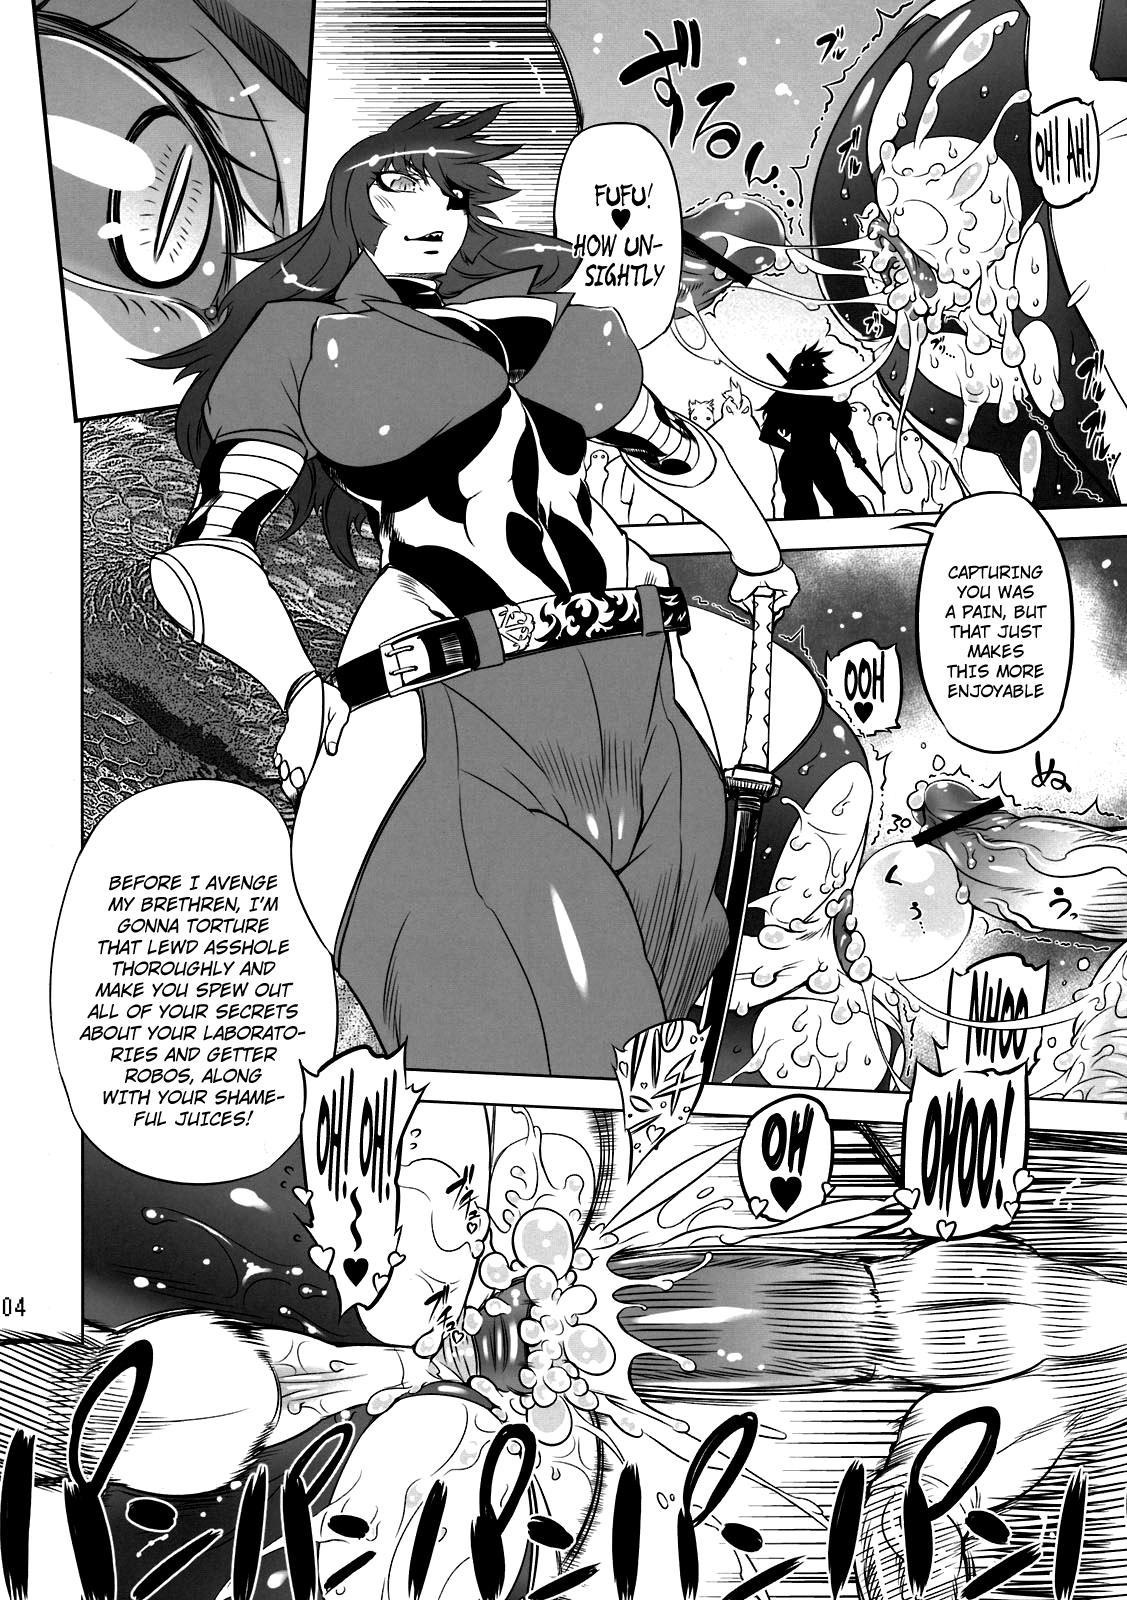 Pussy Fuck Change!! - Getter robo Groupfuck - Page 4